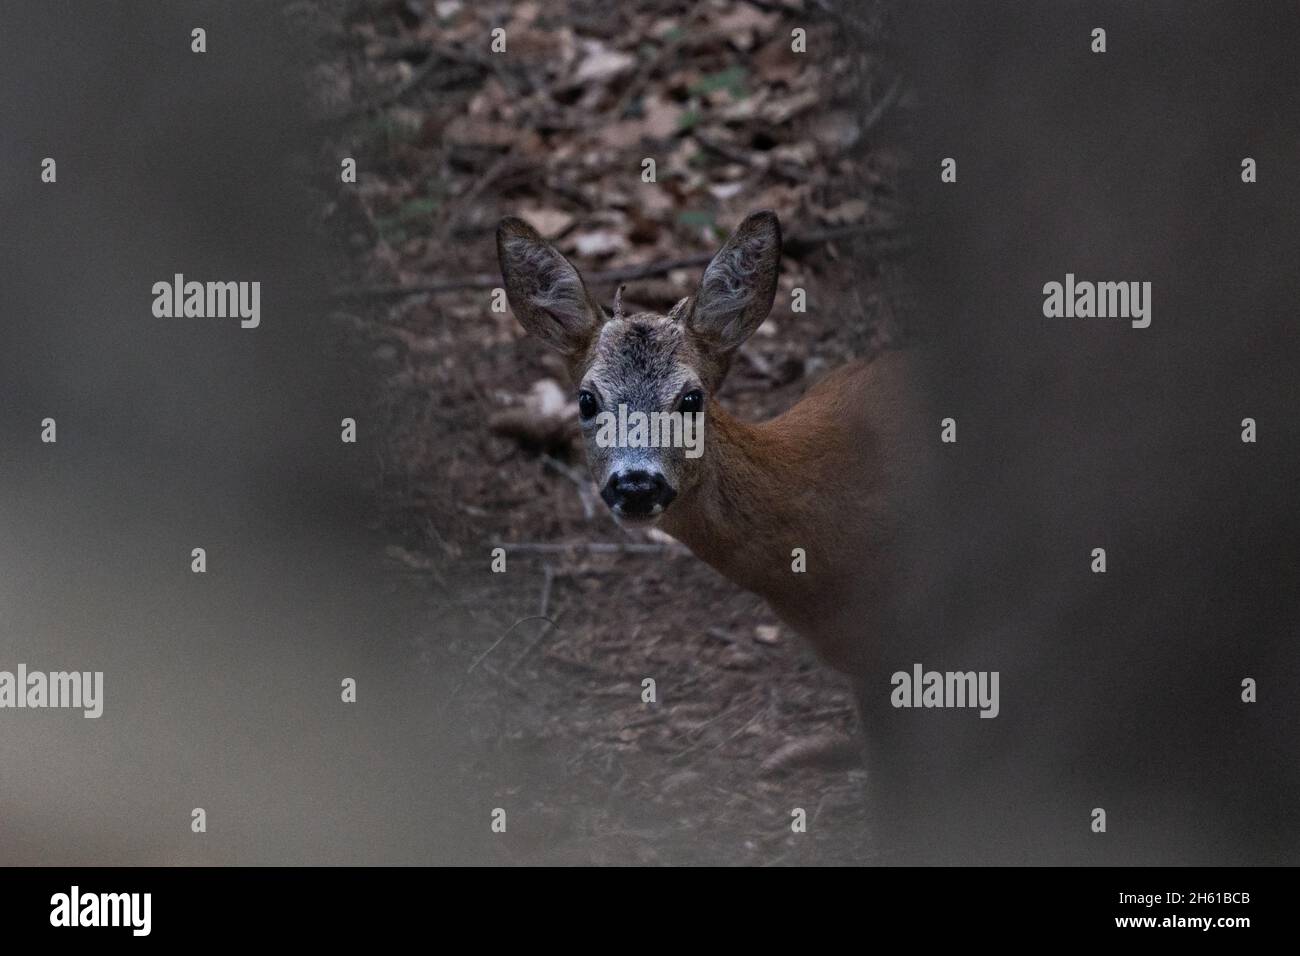 Roe buck yearling with very small antlers, looking eye to eye with the photographer. Stock Photo